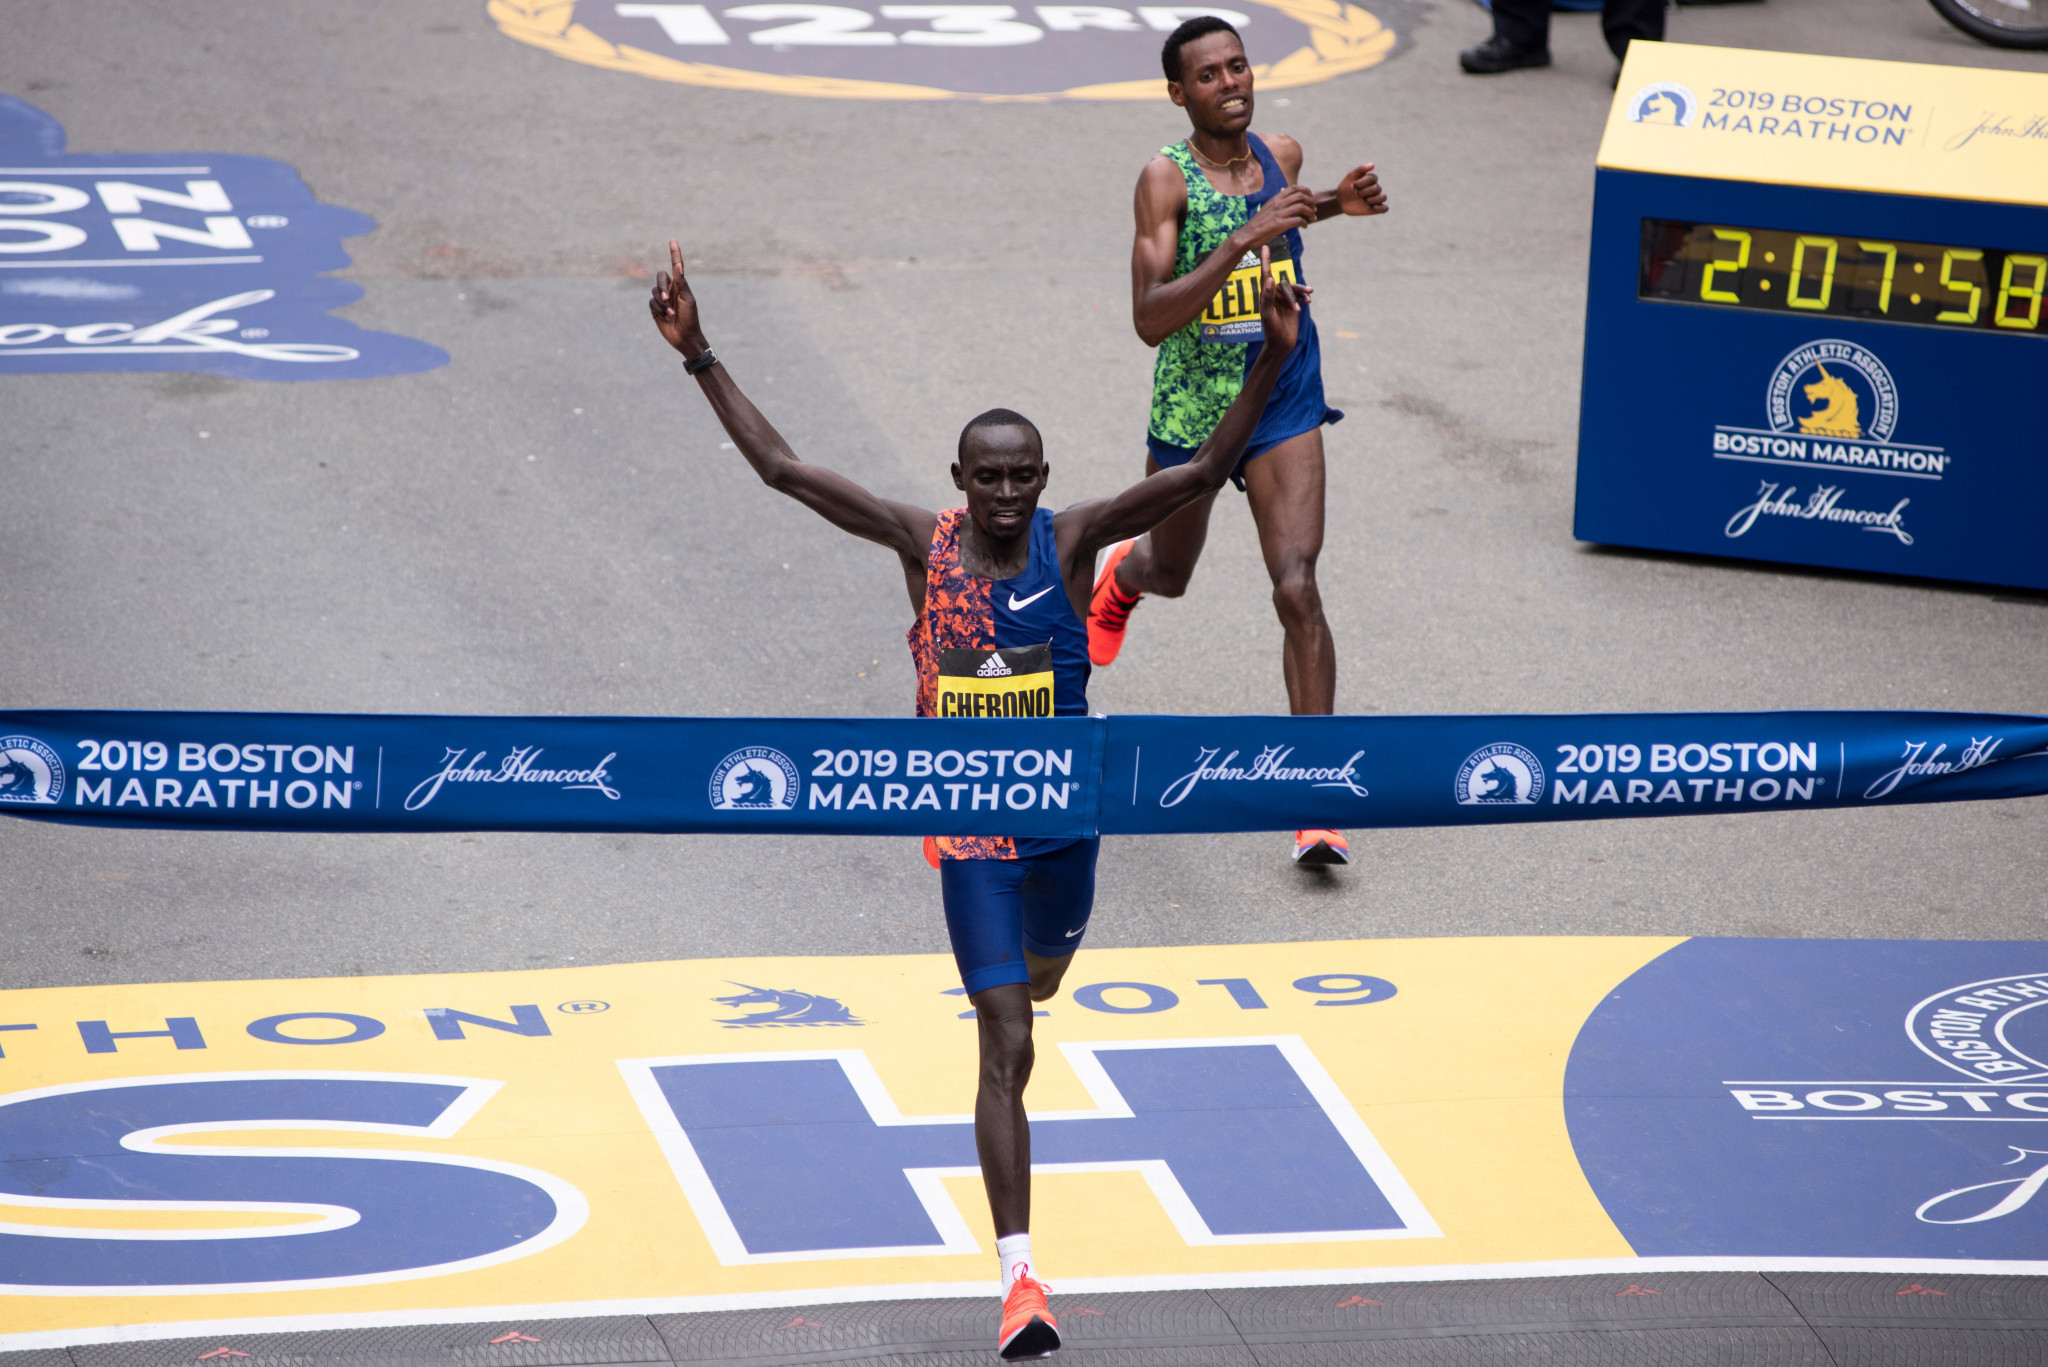 Kenya's Lawrence Cherono wins the Boston Marathon men's title by two seconds from Ethiopia's Lelisa Desisa ©Getty Images